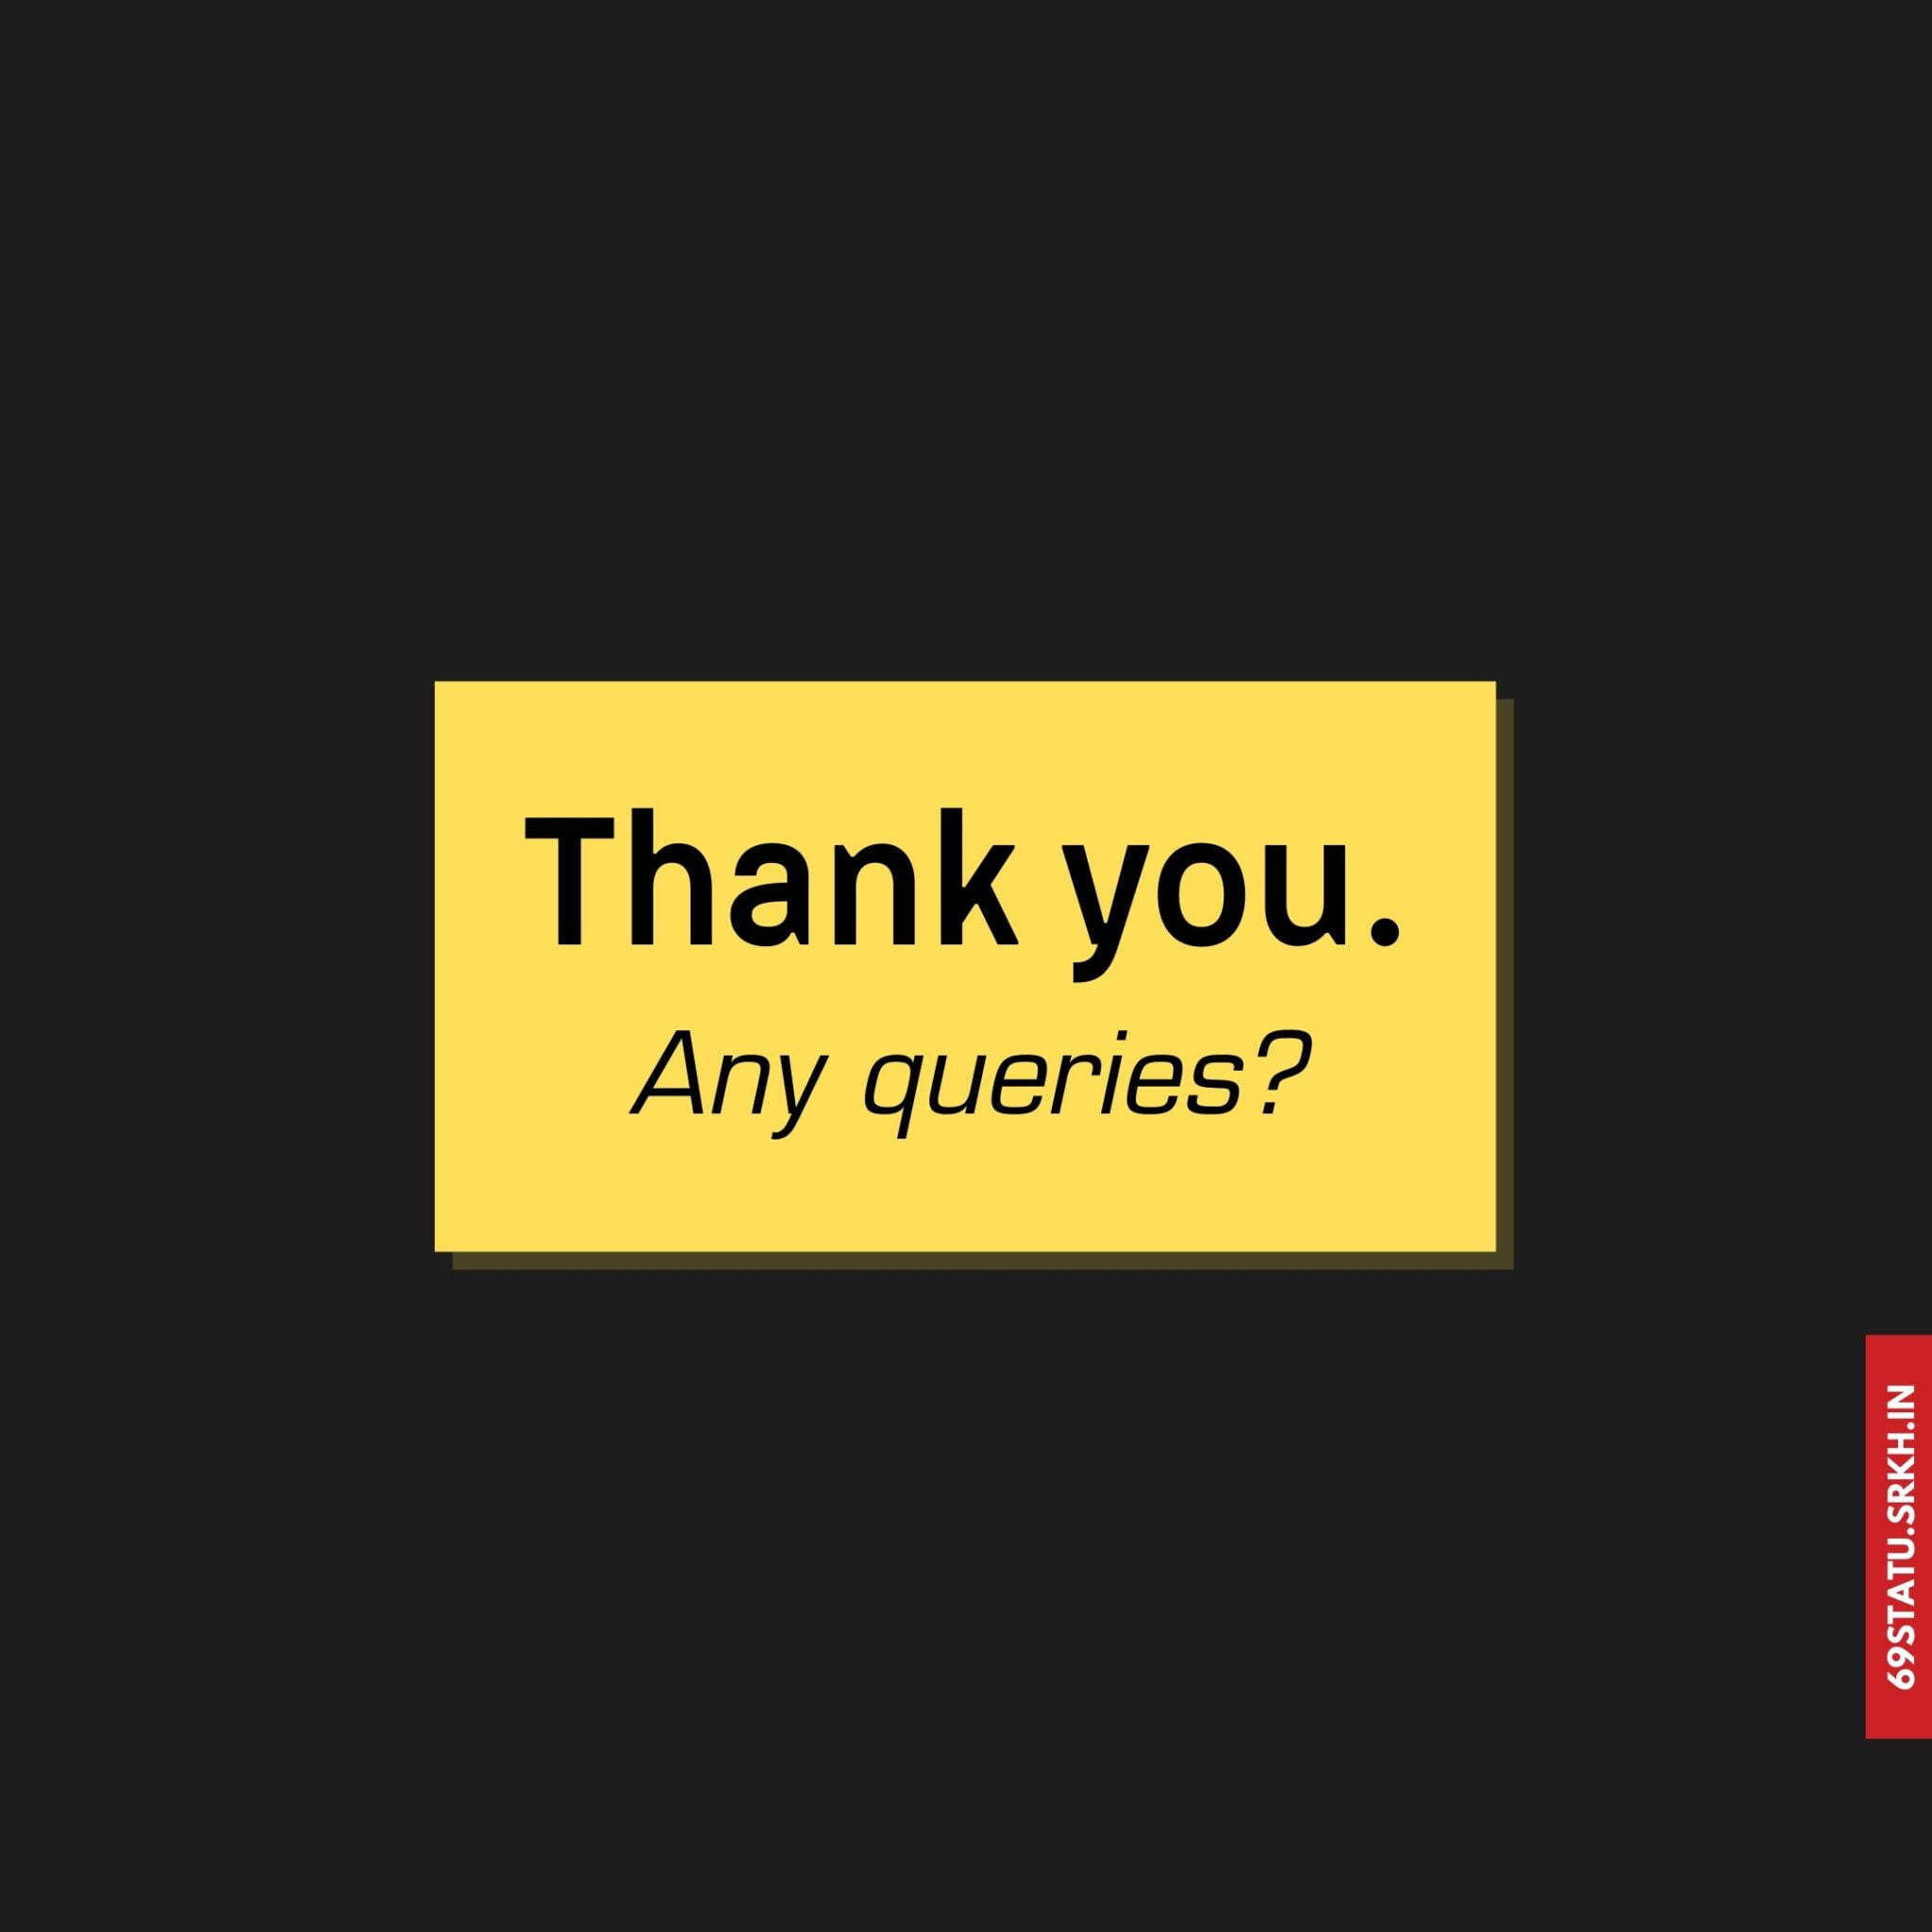 Thank You Any Queries Images for PPT